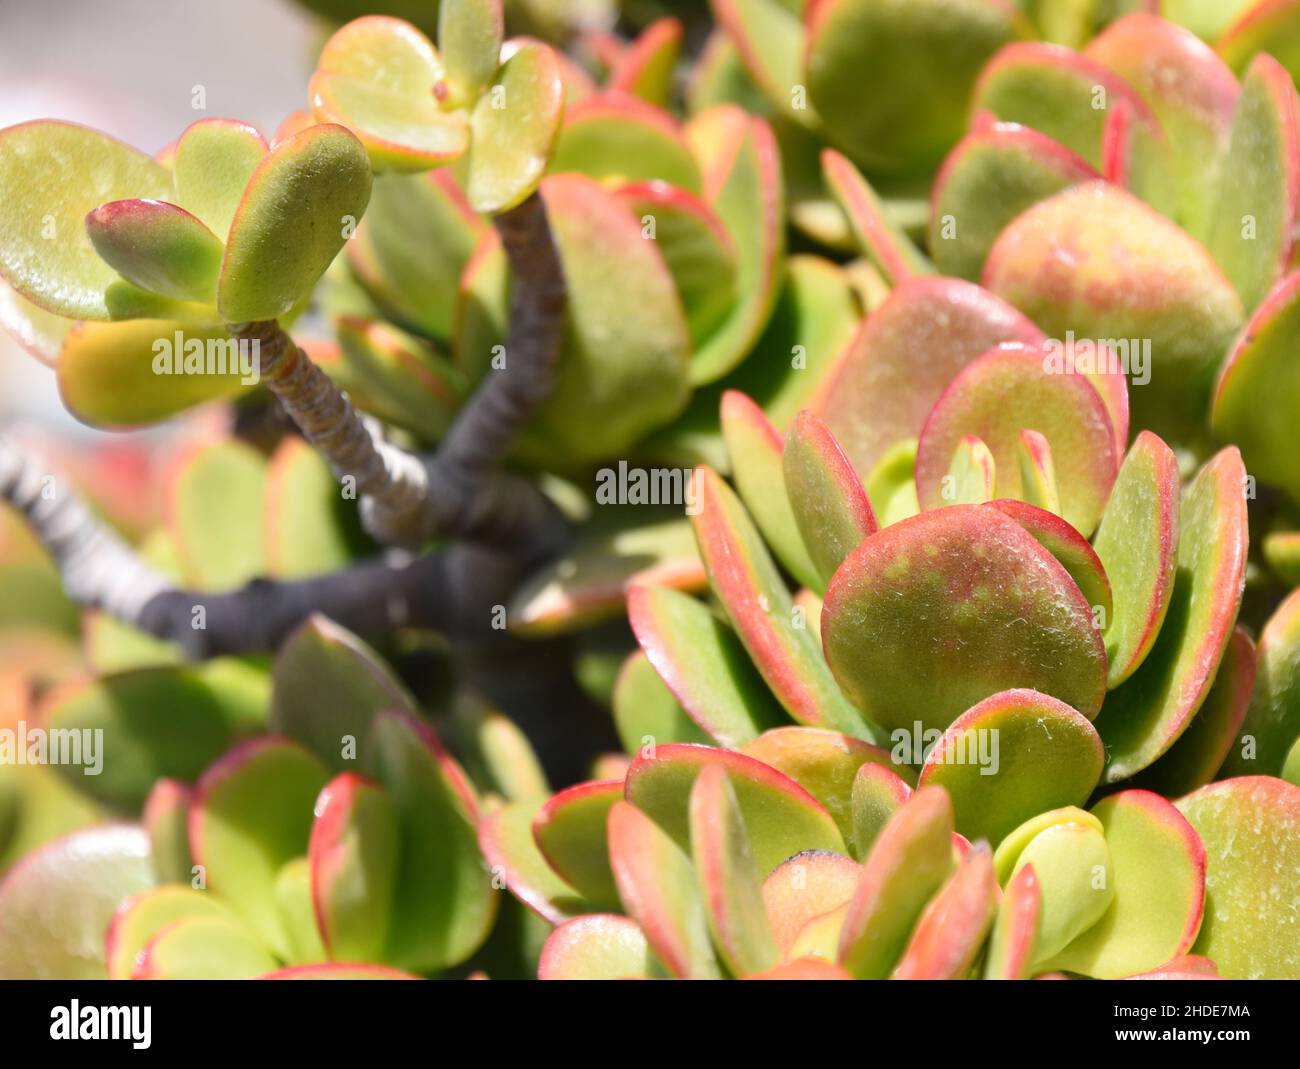 Green and red foliage on a Paddle plant Kalanchoe luciae Stock Photo